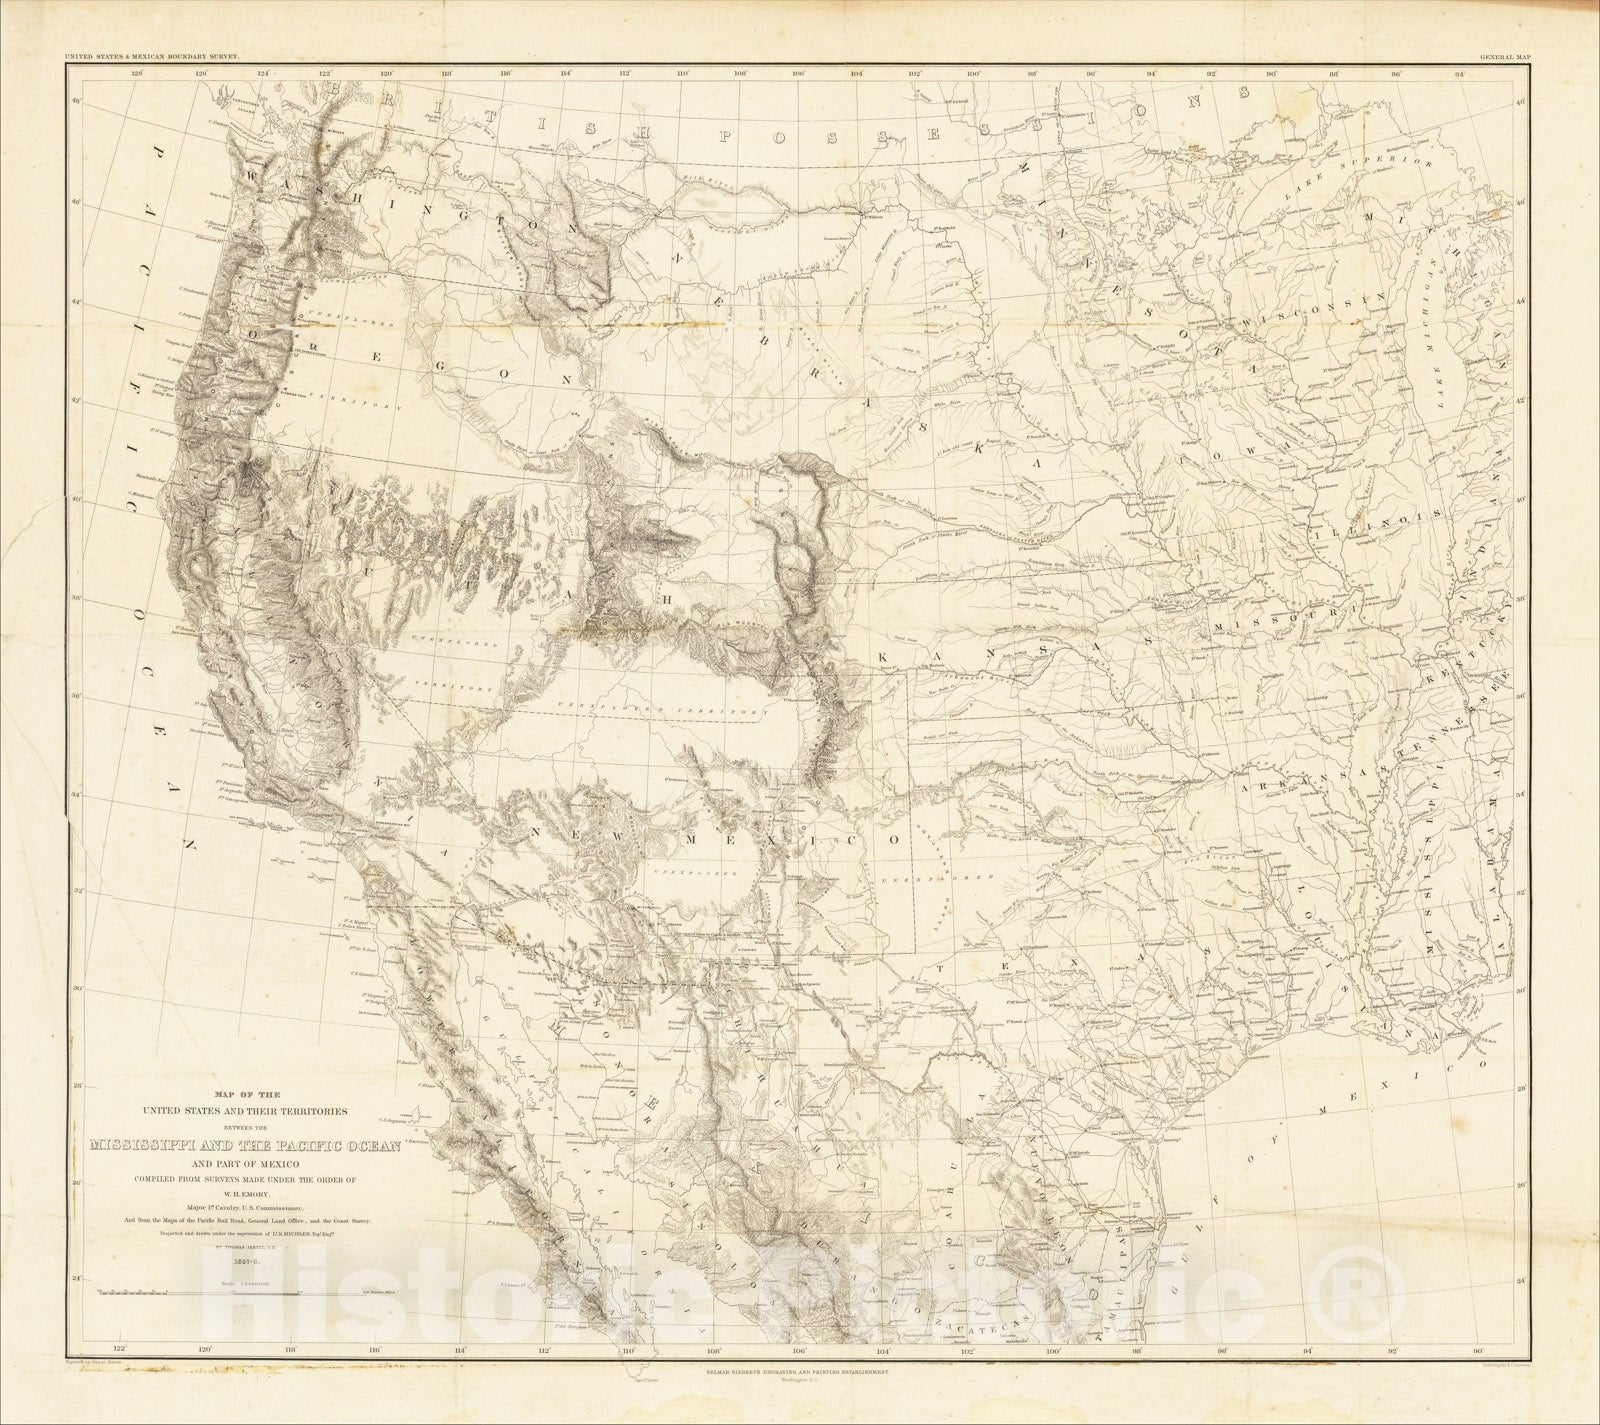 Historic Map : Map of the United States and Their Territories Between the Mississippi and the Pacific Ocean and Part of Mexico, W.H. Emory, 1857-8., 1858, v2, Vintage Wall Art